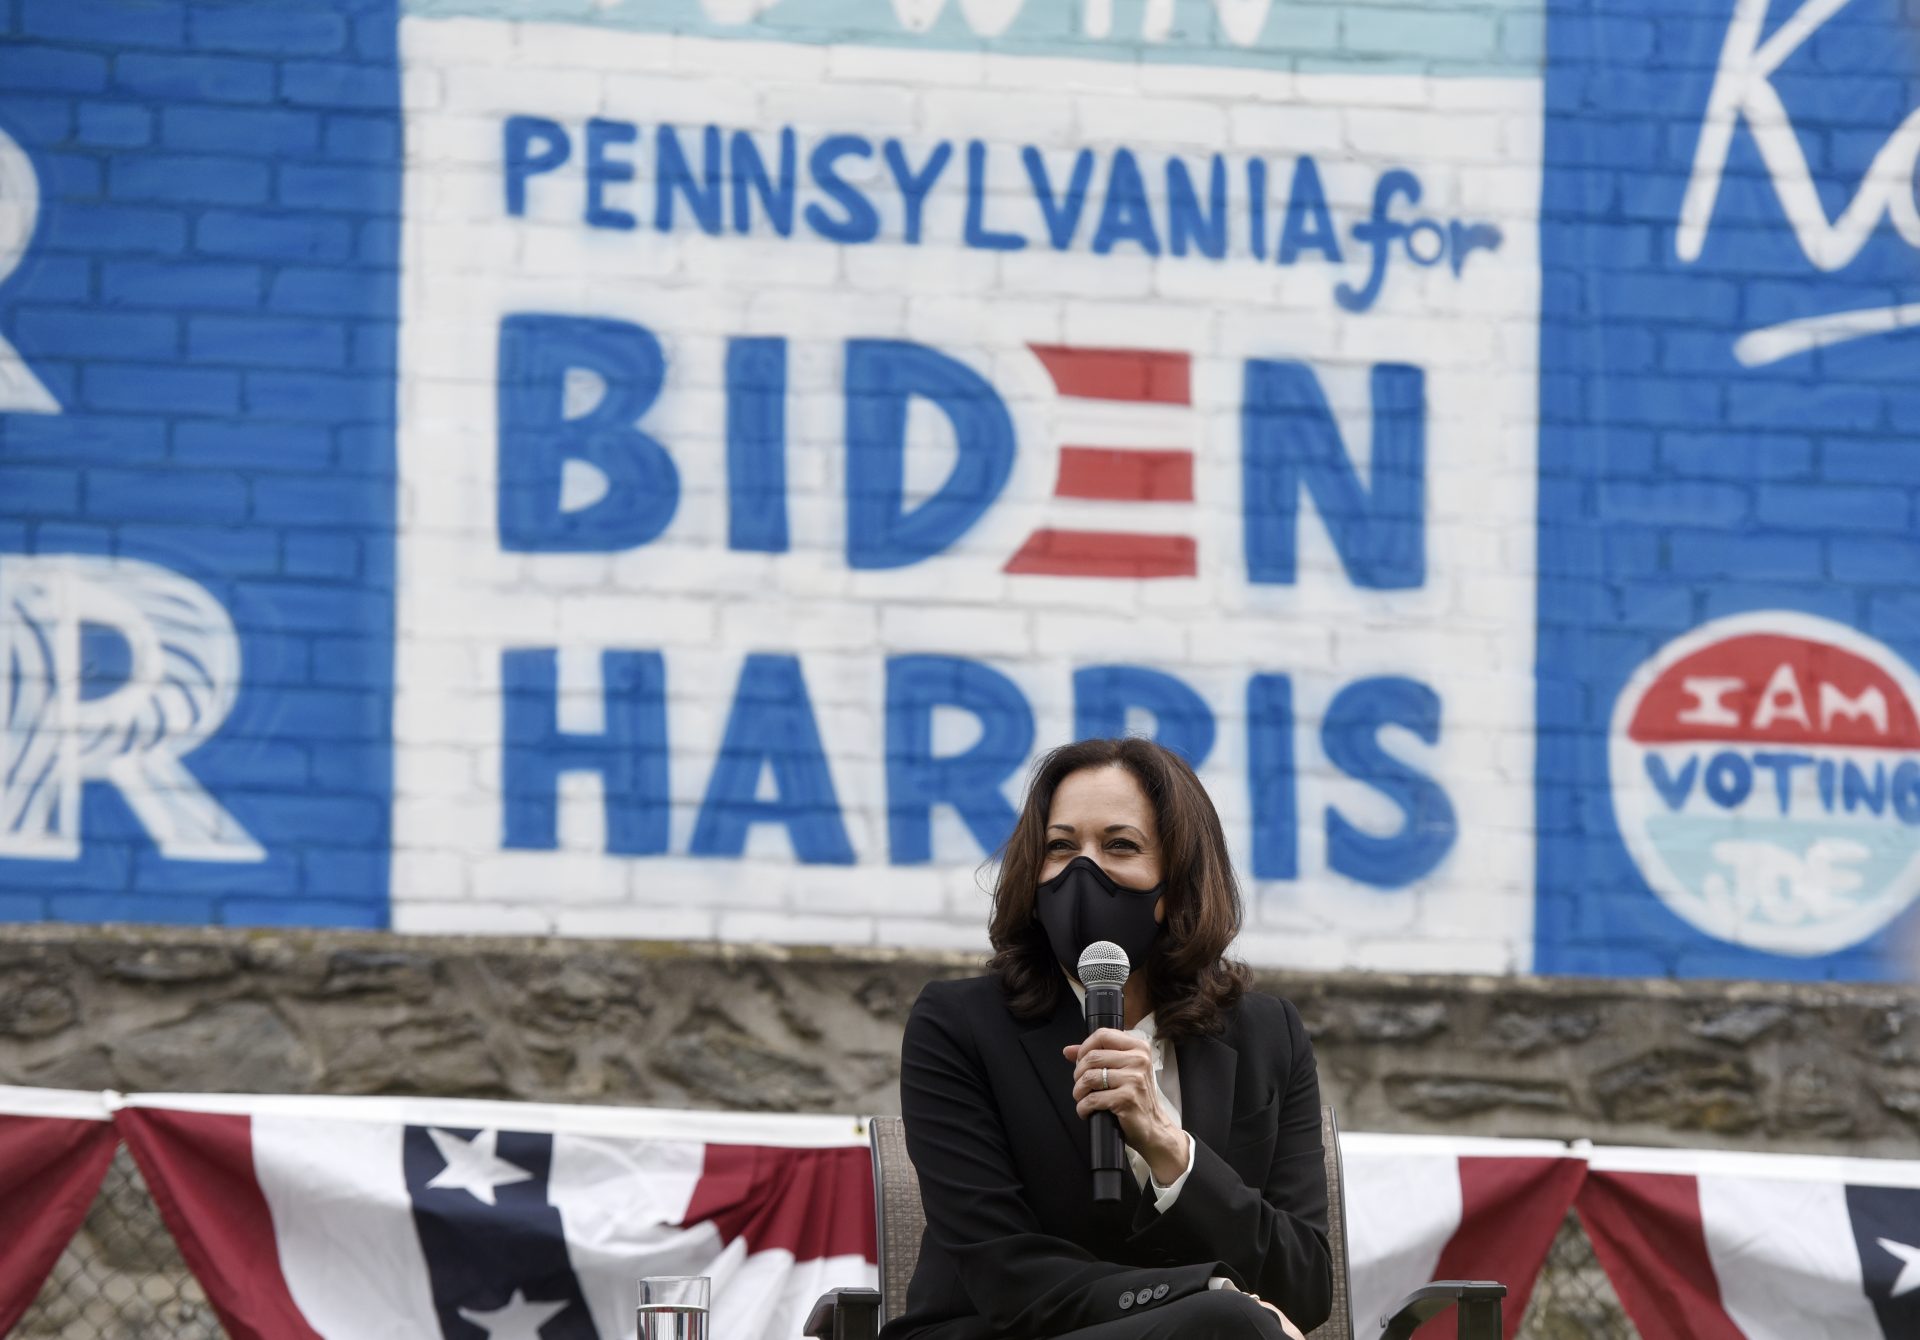 Democratic vice presidential candidate Sen. Kamala Harris, D-Calif., participates in the Sister to Sister Mobilization in Action event during a campaign stop, Thursday, Sept. 17, 2020, in Philadelphia.